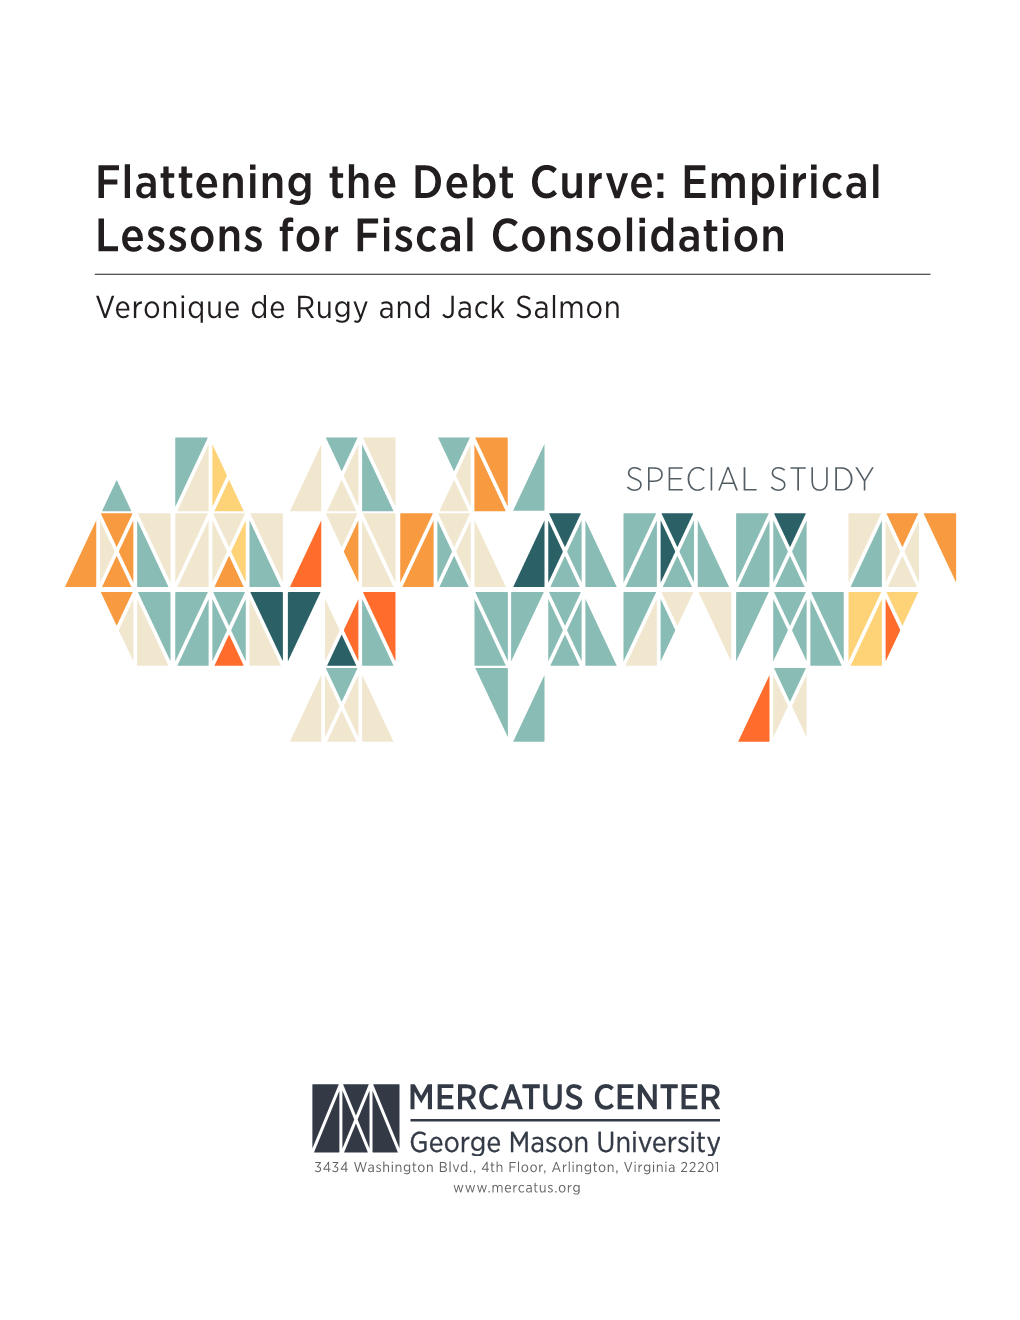 Flattening the Debt Curve: Empirical Lessons for Fiscal Consolidation Veronique De Rugy and Jack Salmon